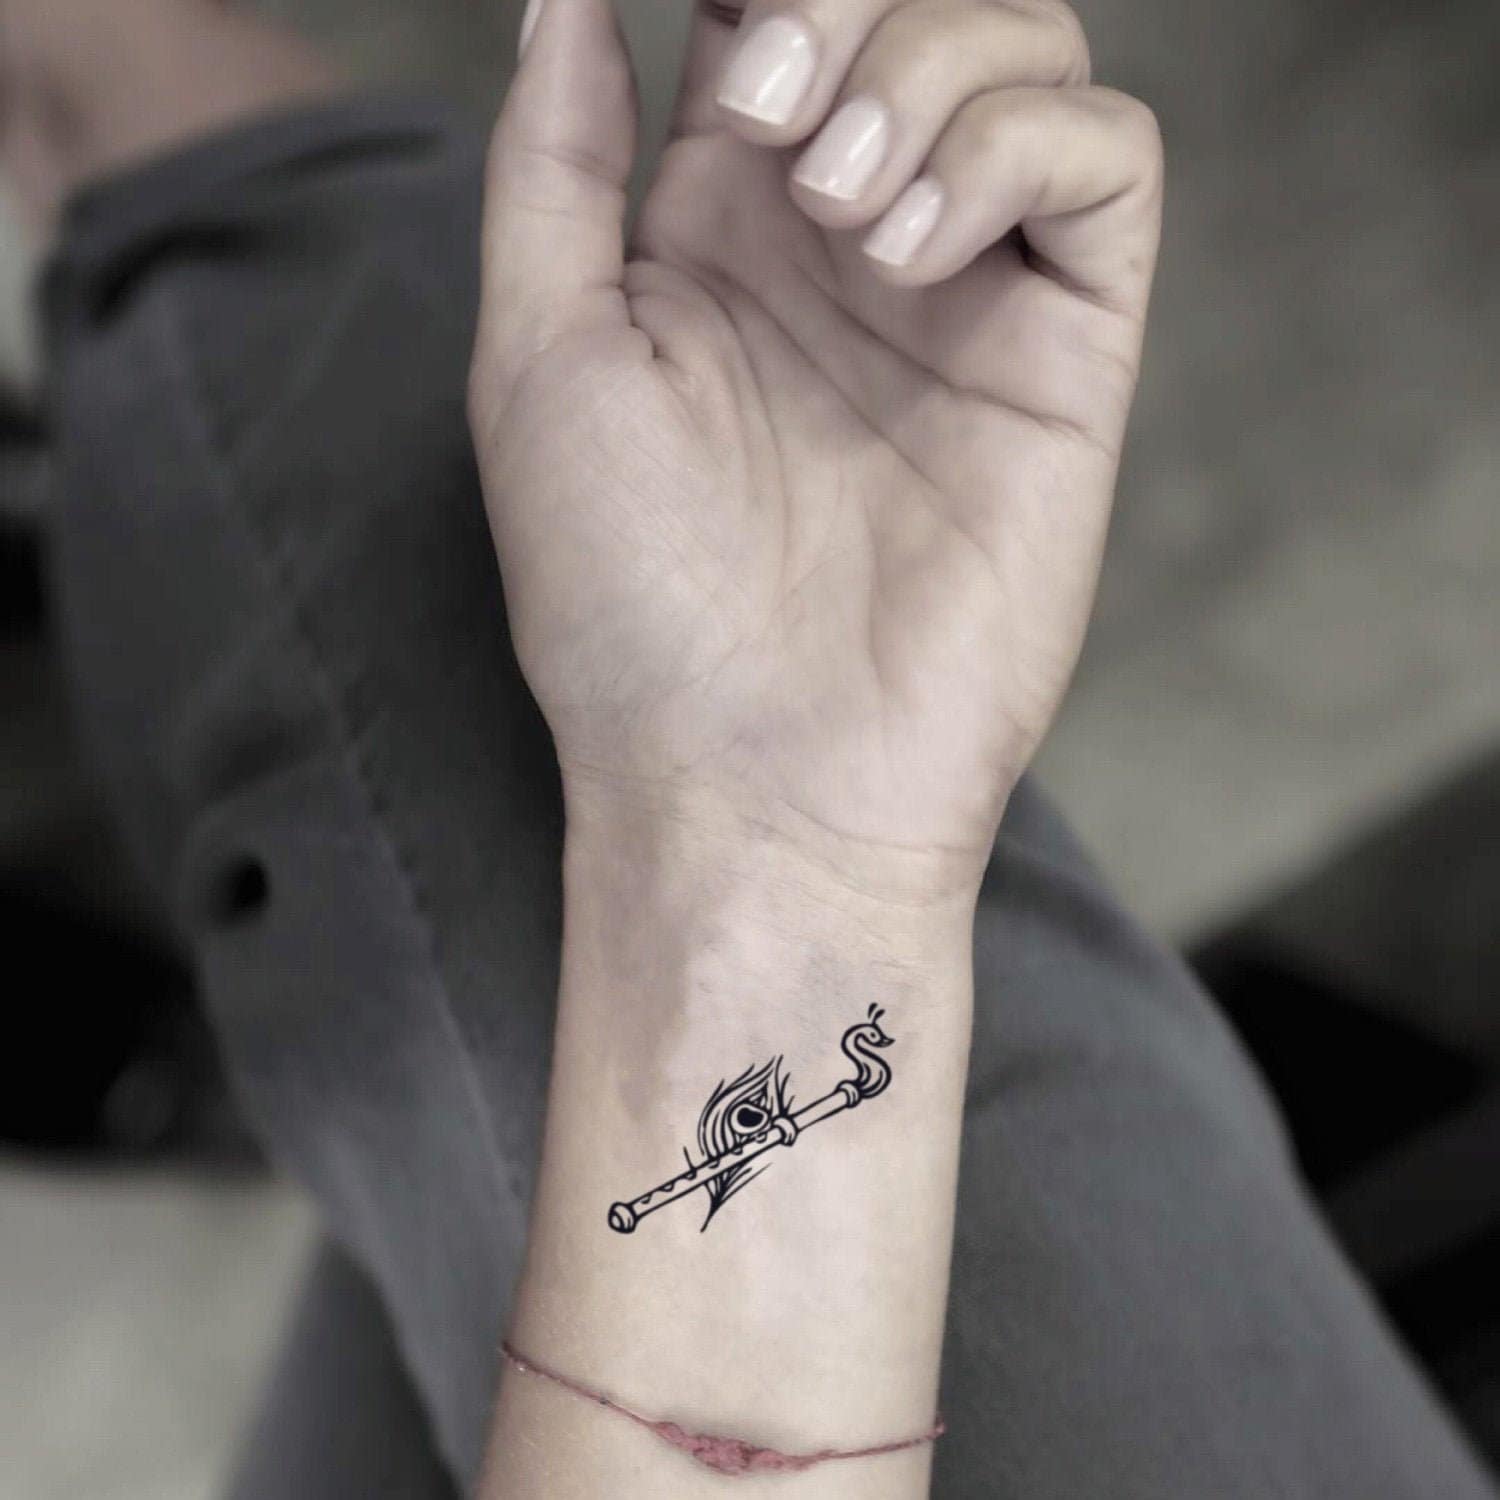 Impress tattoo - The Hare Krishna mantra, also referred to reverentially as  the Maha Mantra (